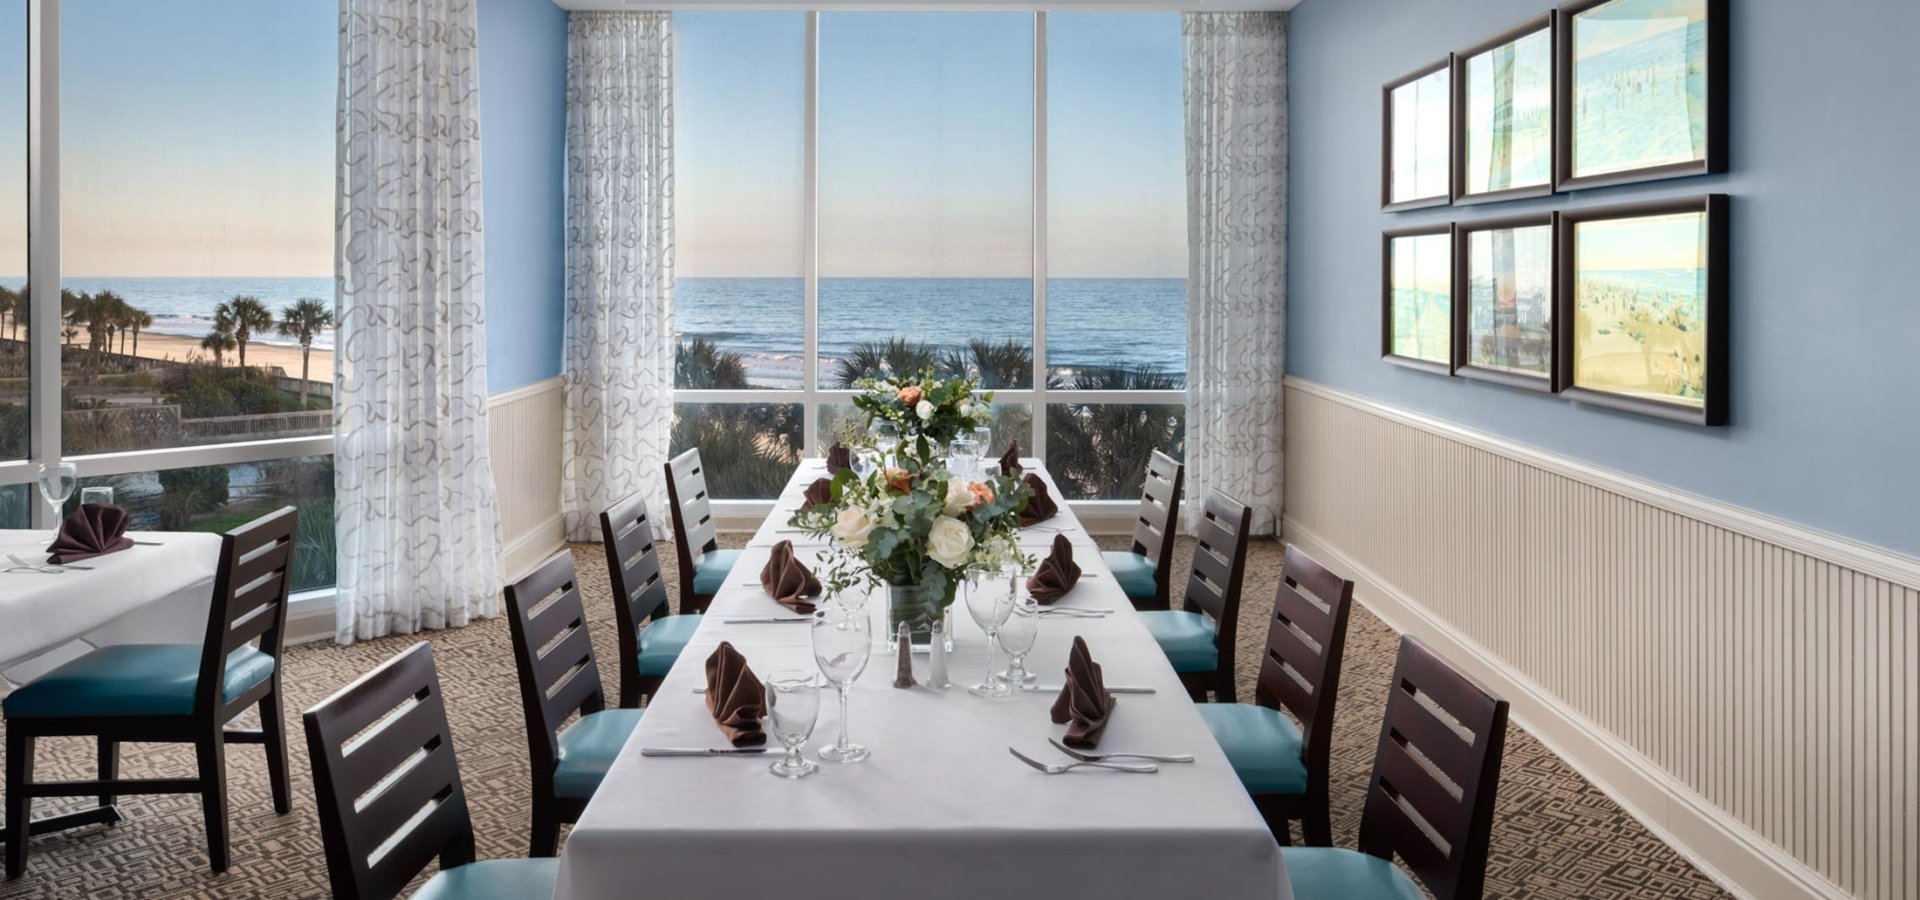 The Amalfi private dining room in Myrtle Beach